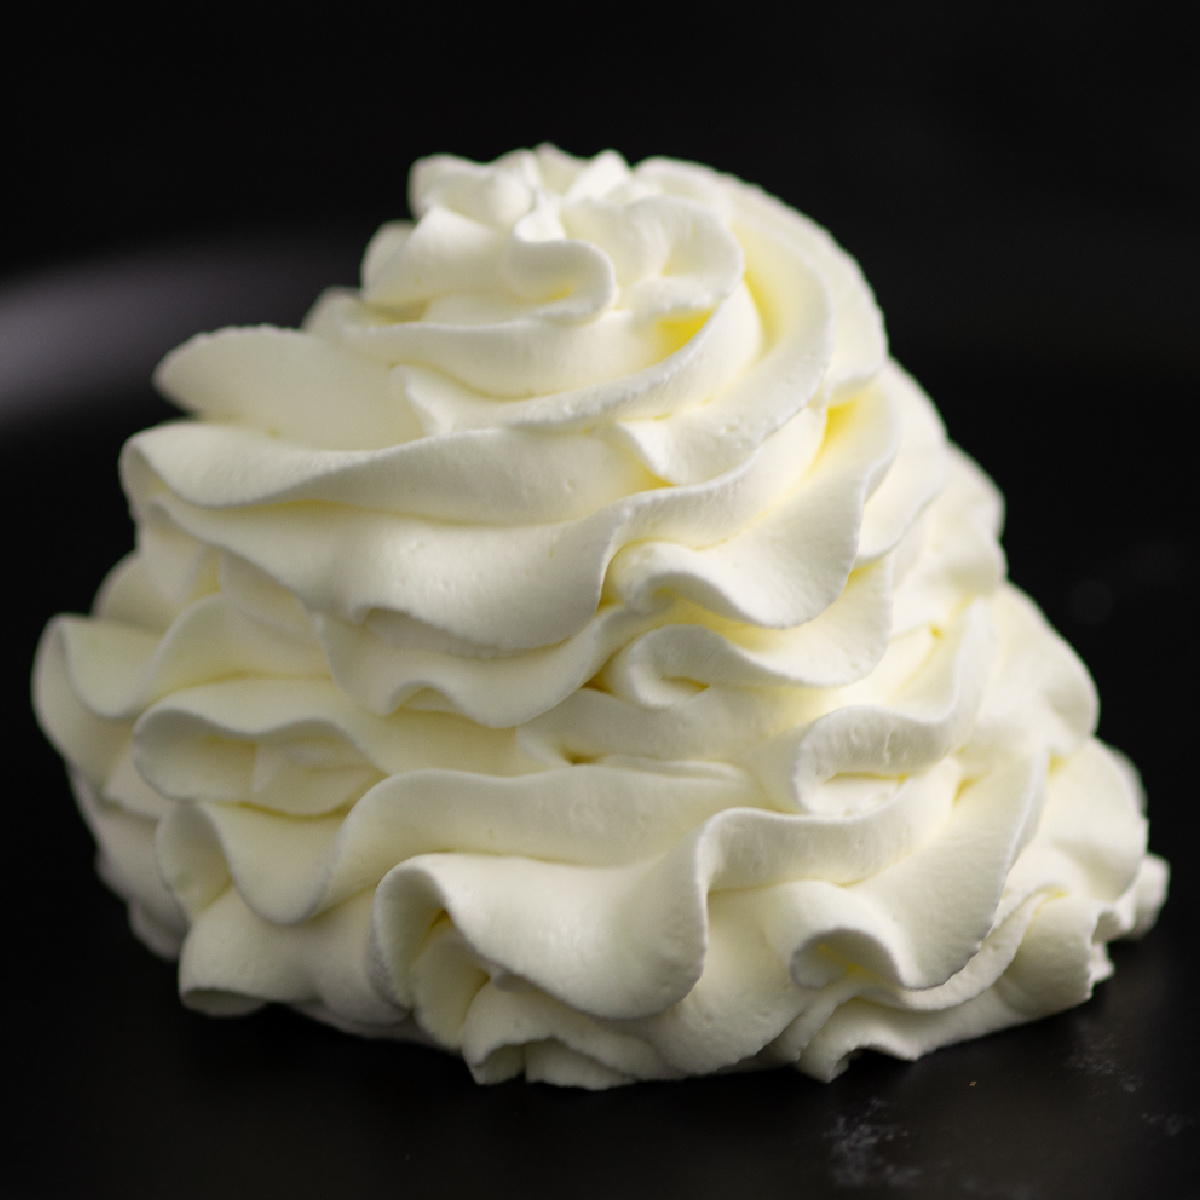 How to Stabilize Whipped Cream - The Gracious Wife